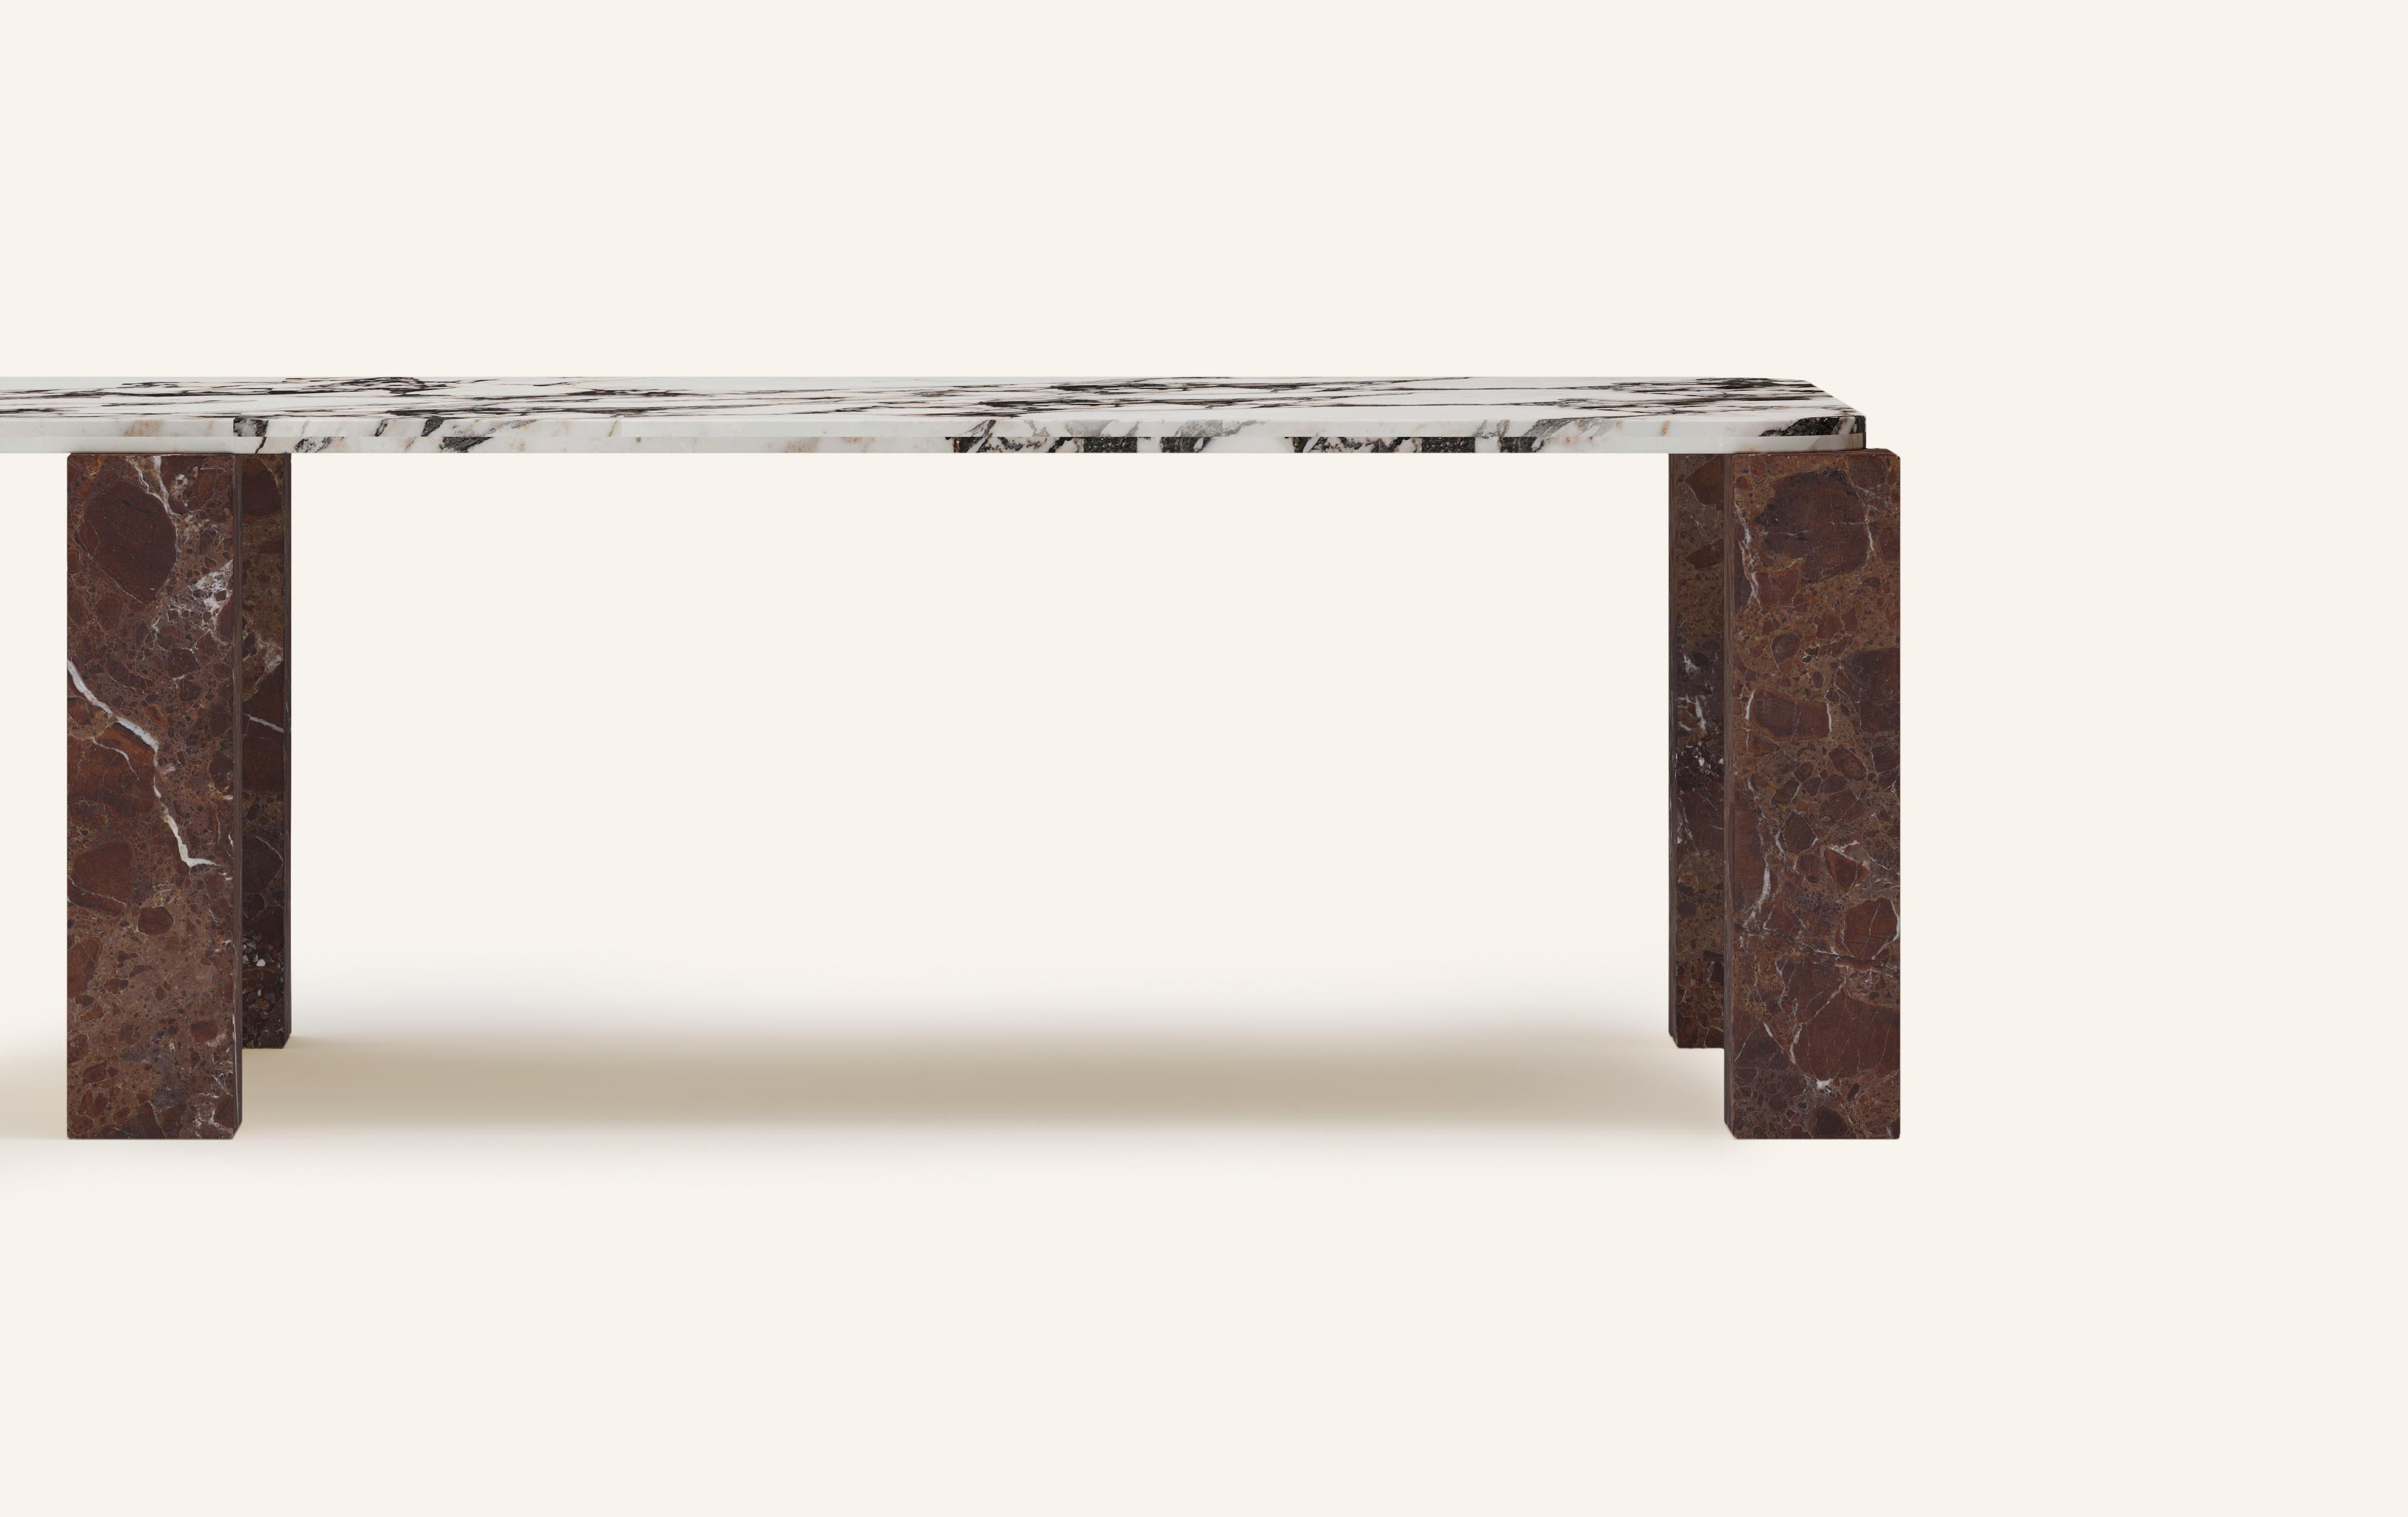 American FORM(LA) Cubo Rectangle Dining Table 146”L x 50”W x 30”H Viola & Rosso Marble For Sale